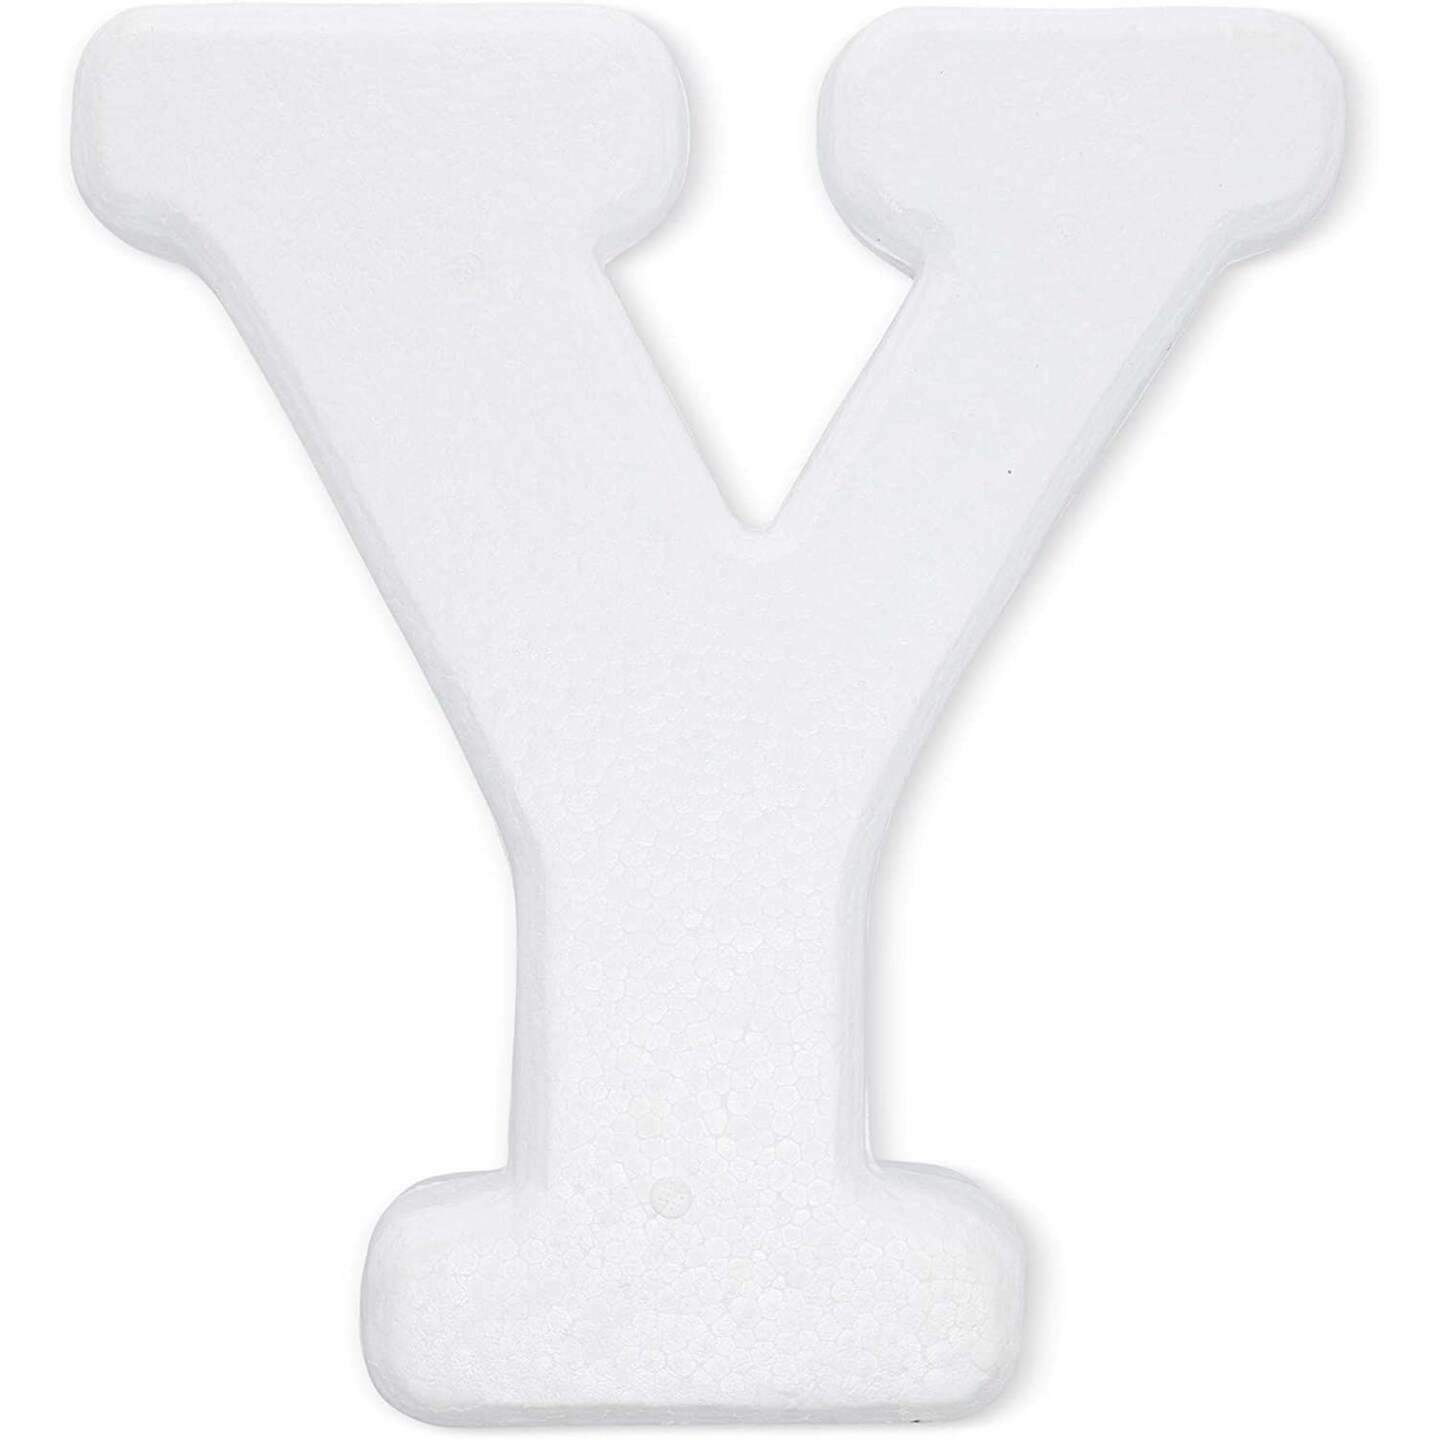 Foam Letters for Crafts, Letter Y (White, 12 in)